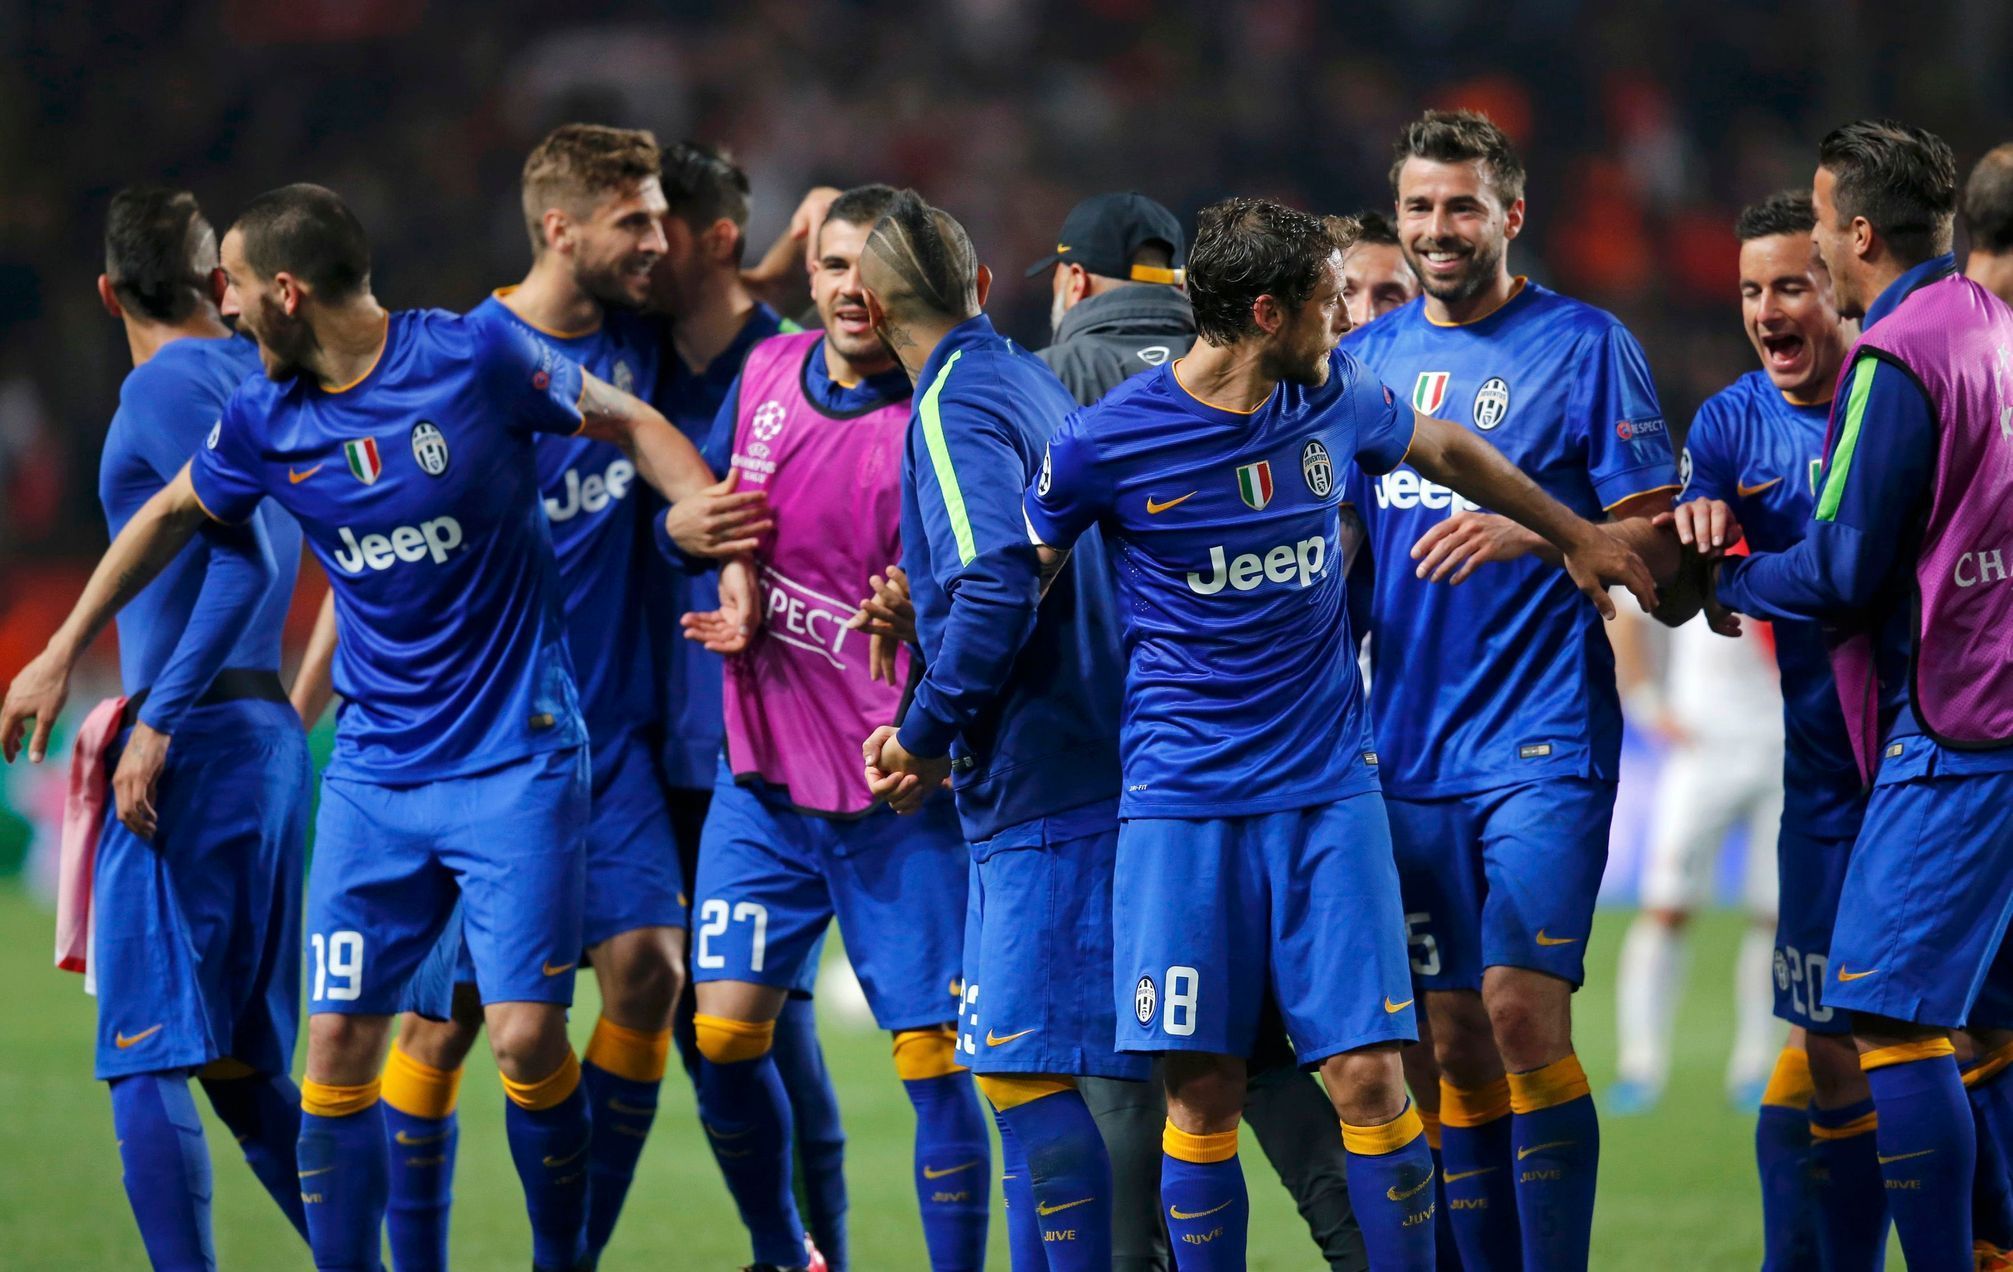 Juventus players celebrate after their team's qualification for the semi-final of the Champions League at the end of their quarter-final second leg soccer match against Monaco at the Louis II stadium